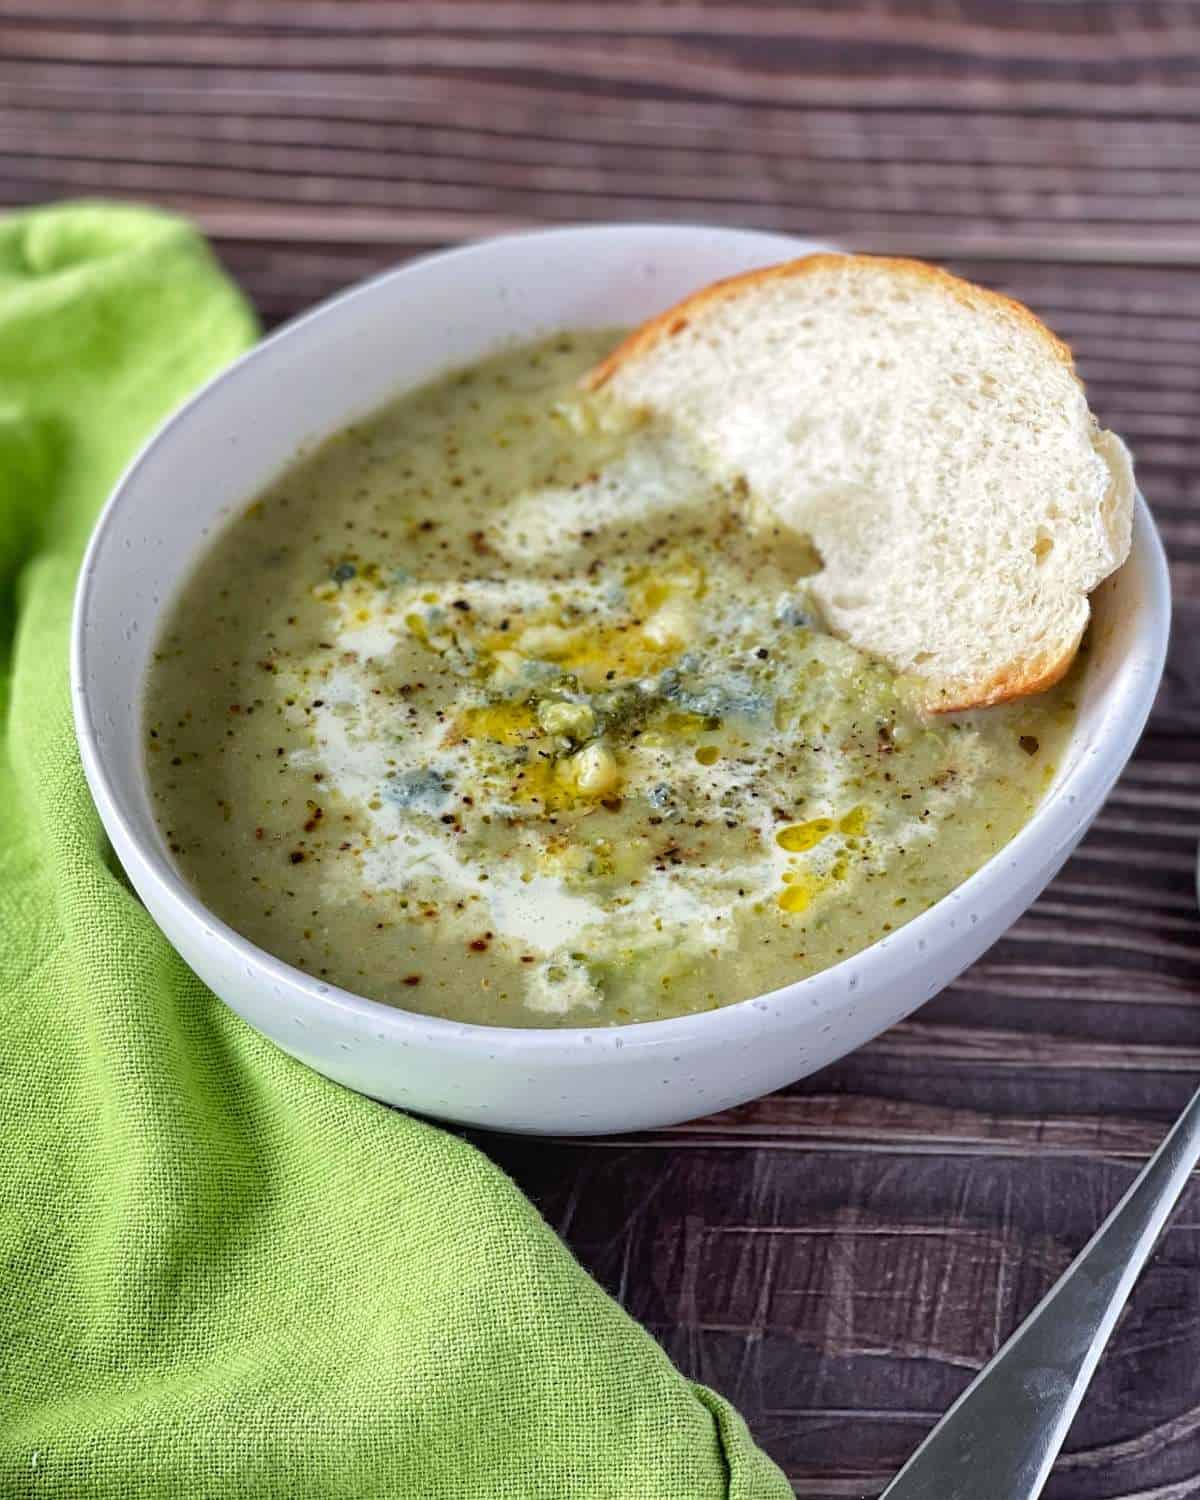 Blue cheese and broccoli soup served in a white soup bowl with a slice of fresh bread, a green napkin to the side on a wooden table